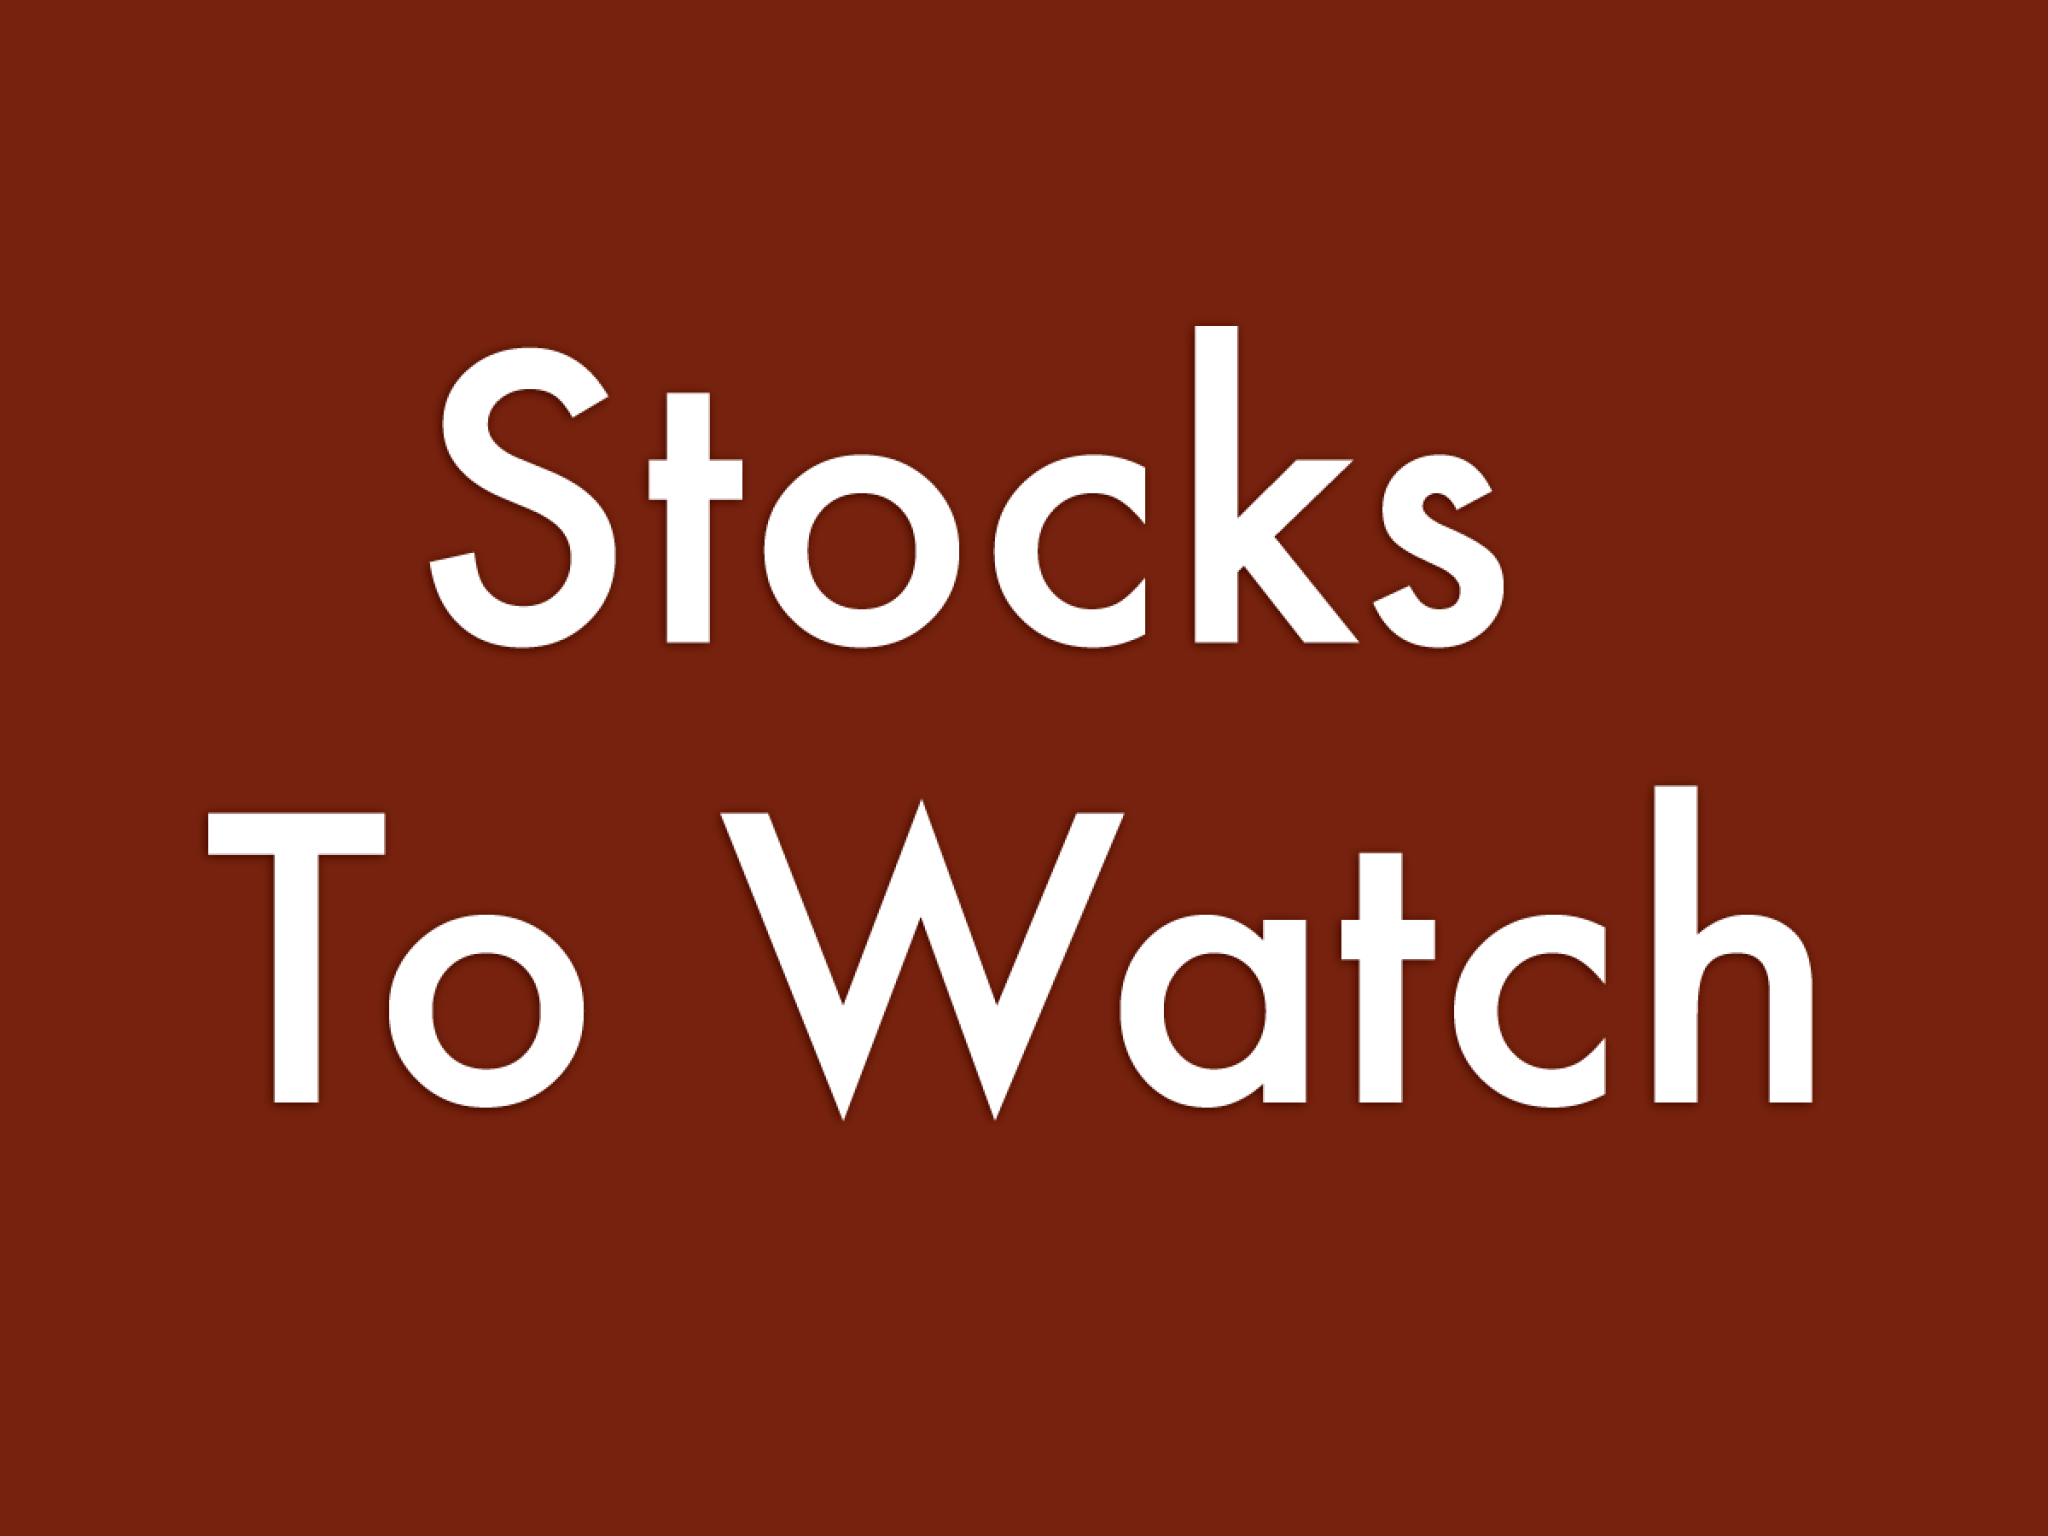  5-stocks-to-watch-for-october-2-2020 